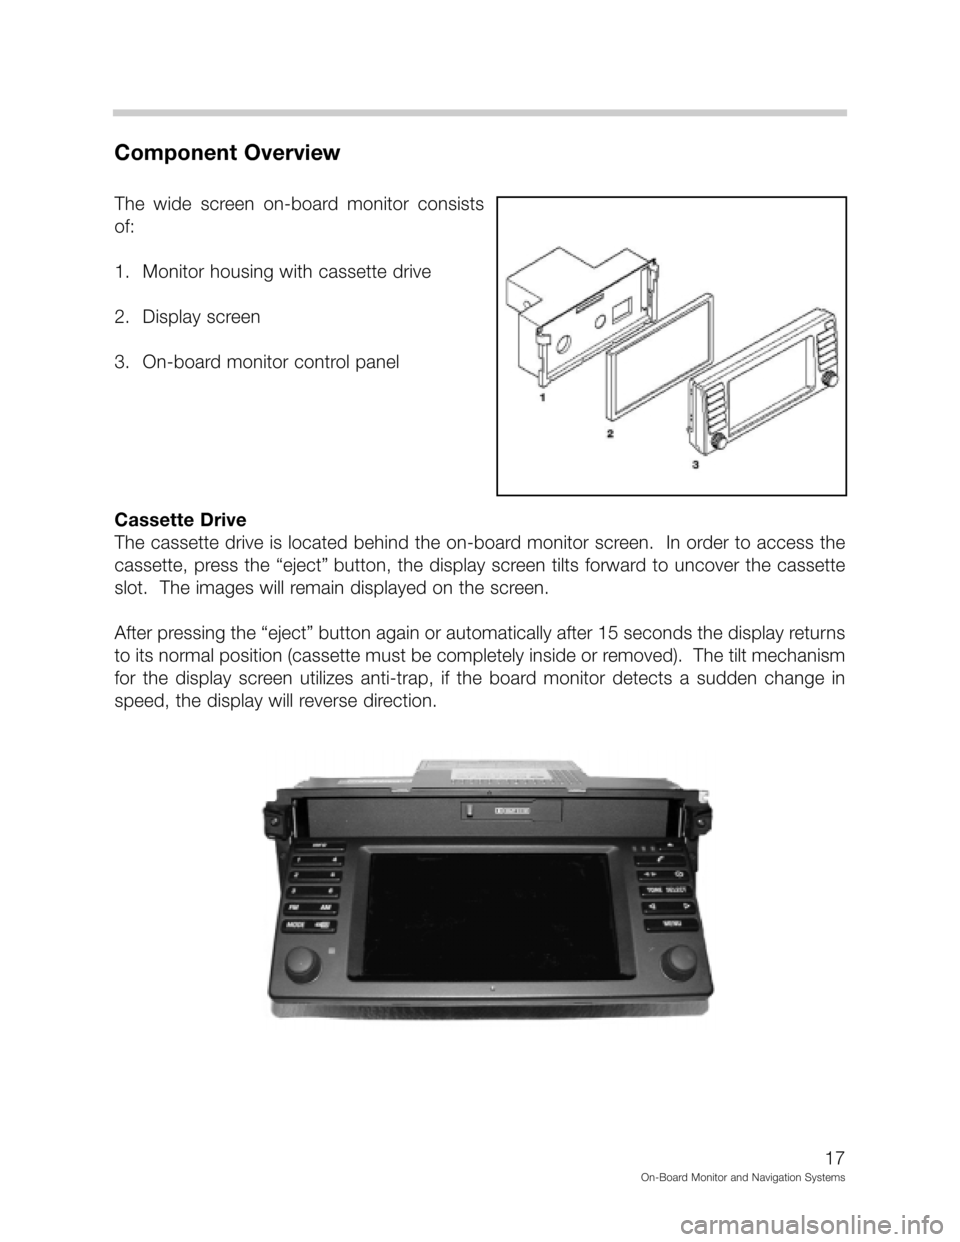 BMW 7 SERIES 2001 E38 On Board Monitor System User Guide *,



"&
(	
2./!!,, 7
# % 
 
 	
 


* 

%&
 

. 
	


